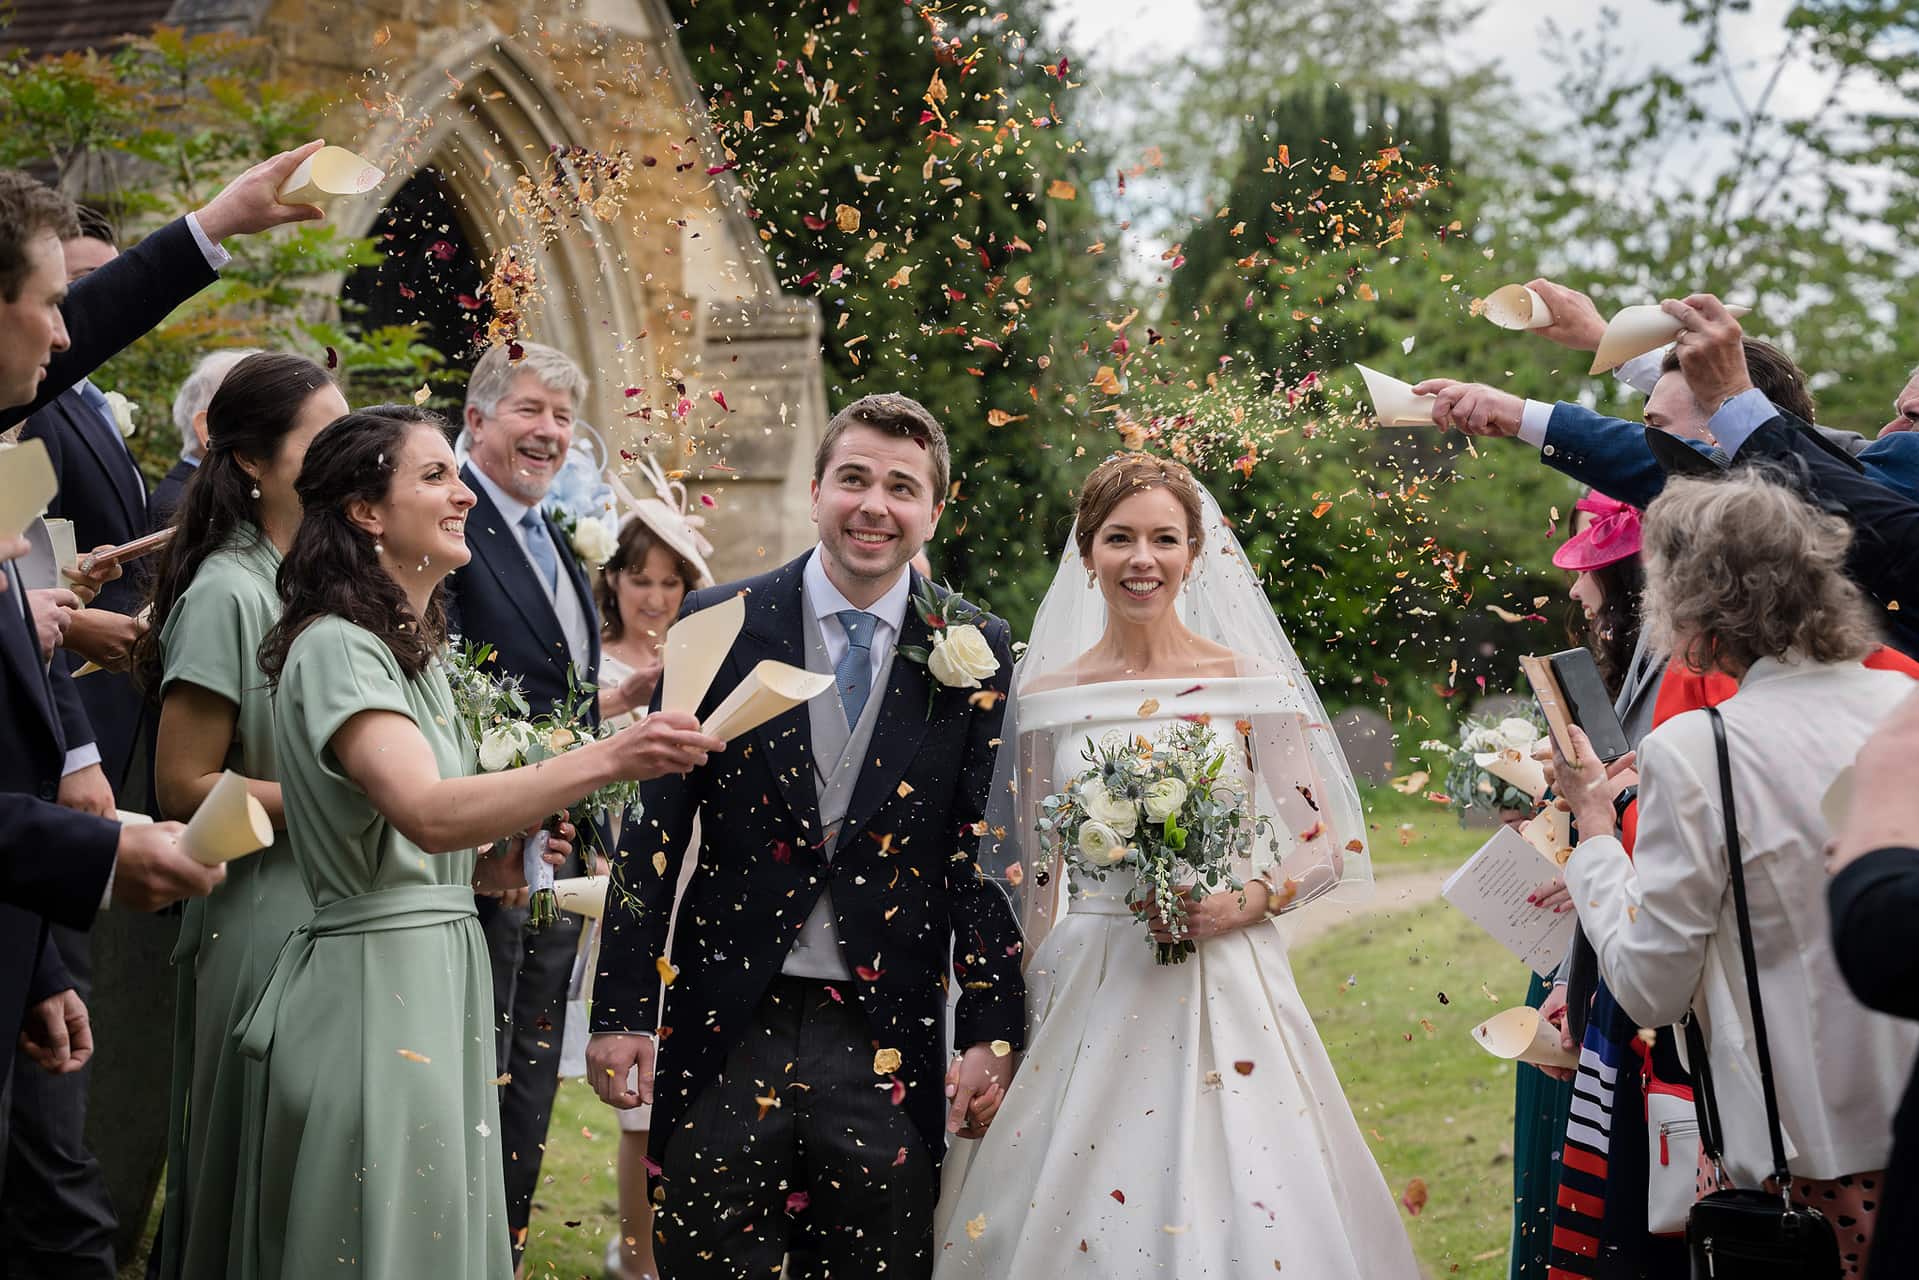 Confetti being thrown over the bride and groom at St Catherine's church in Houghton on the Hill